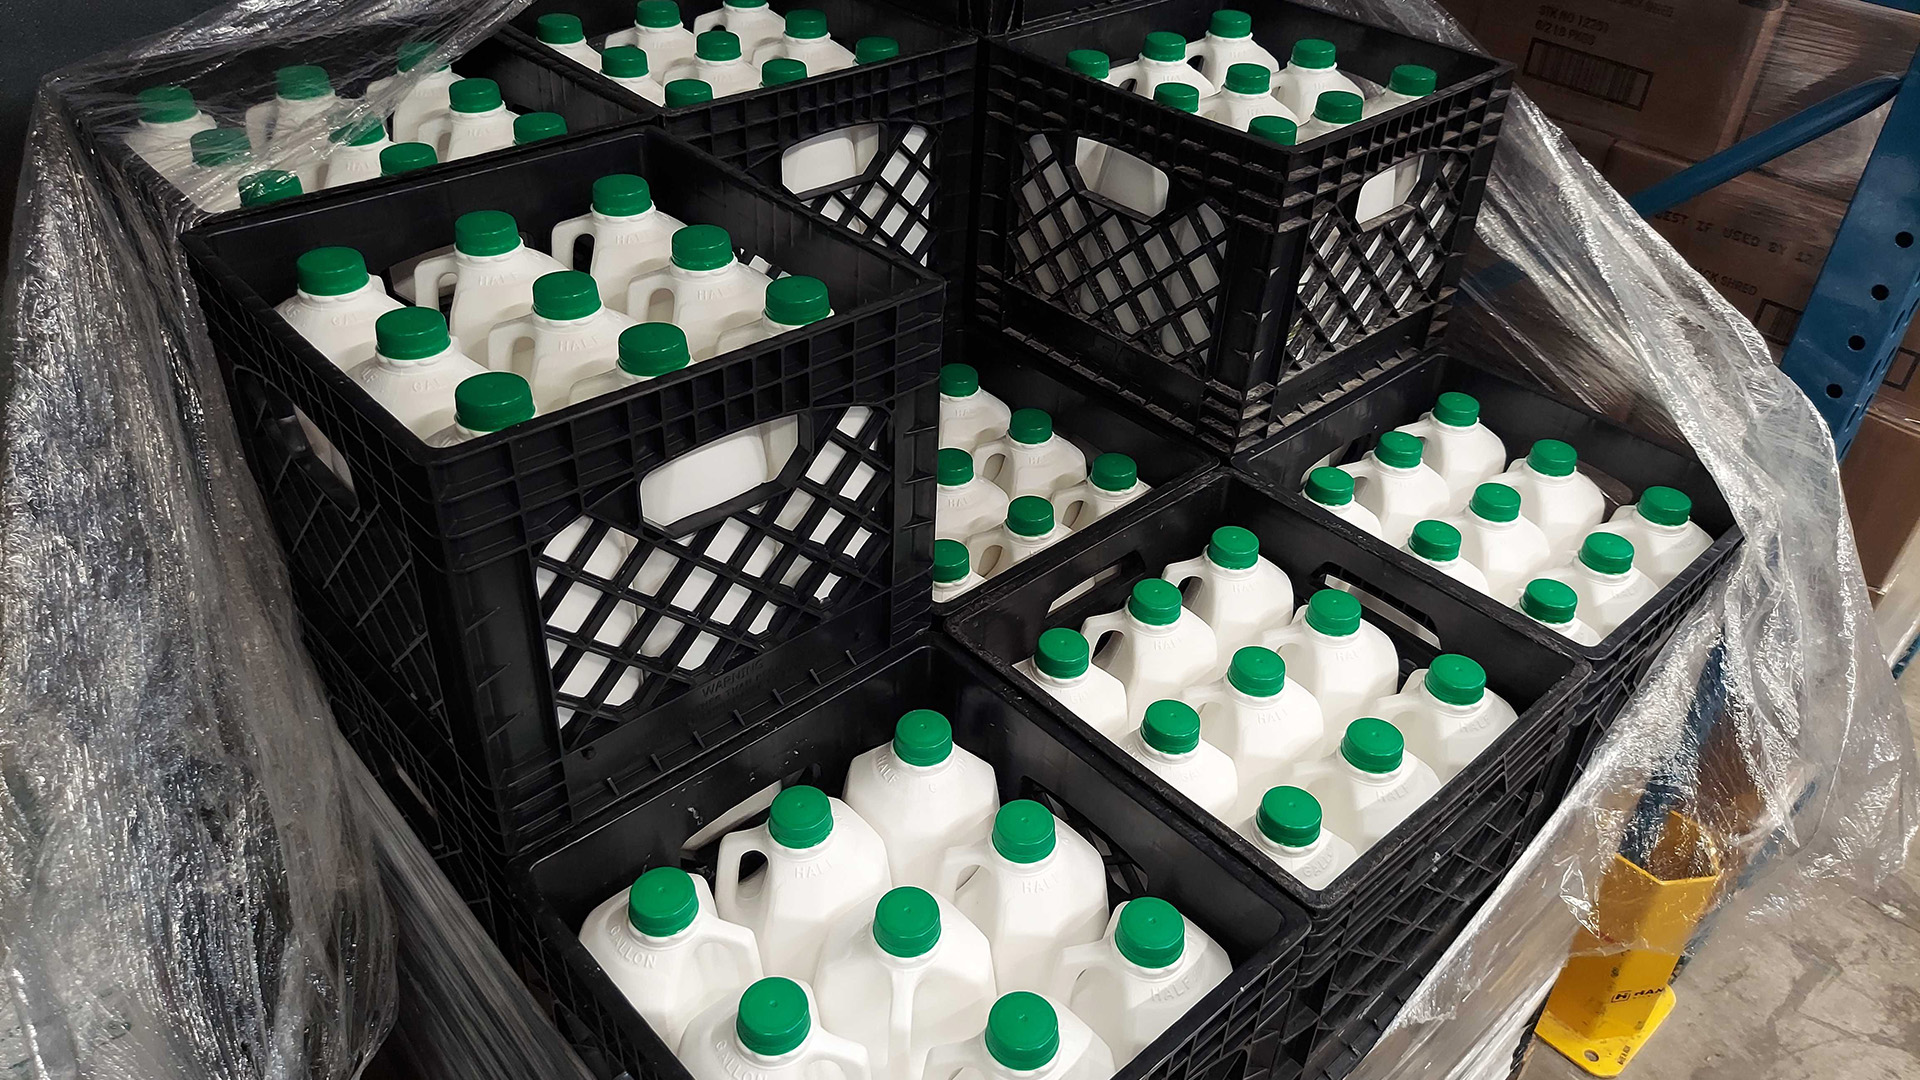 Milk crates filled with plastic gallon jugs of milk sit stacked on a pallet.